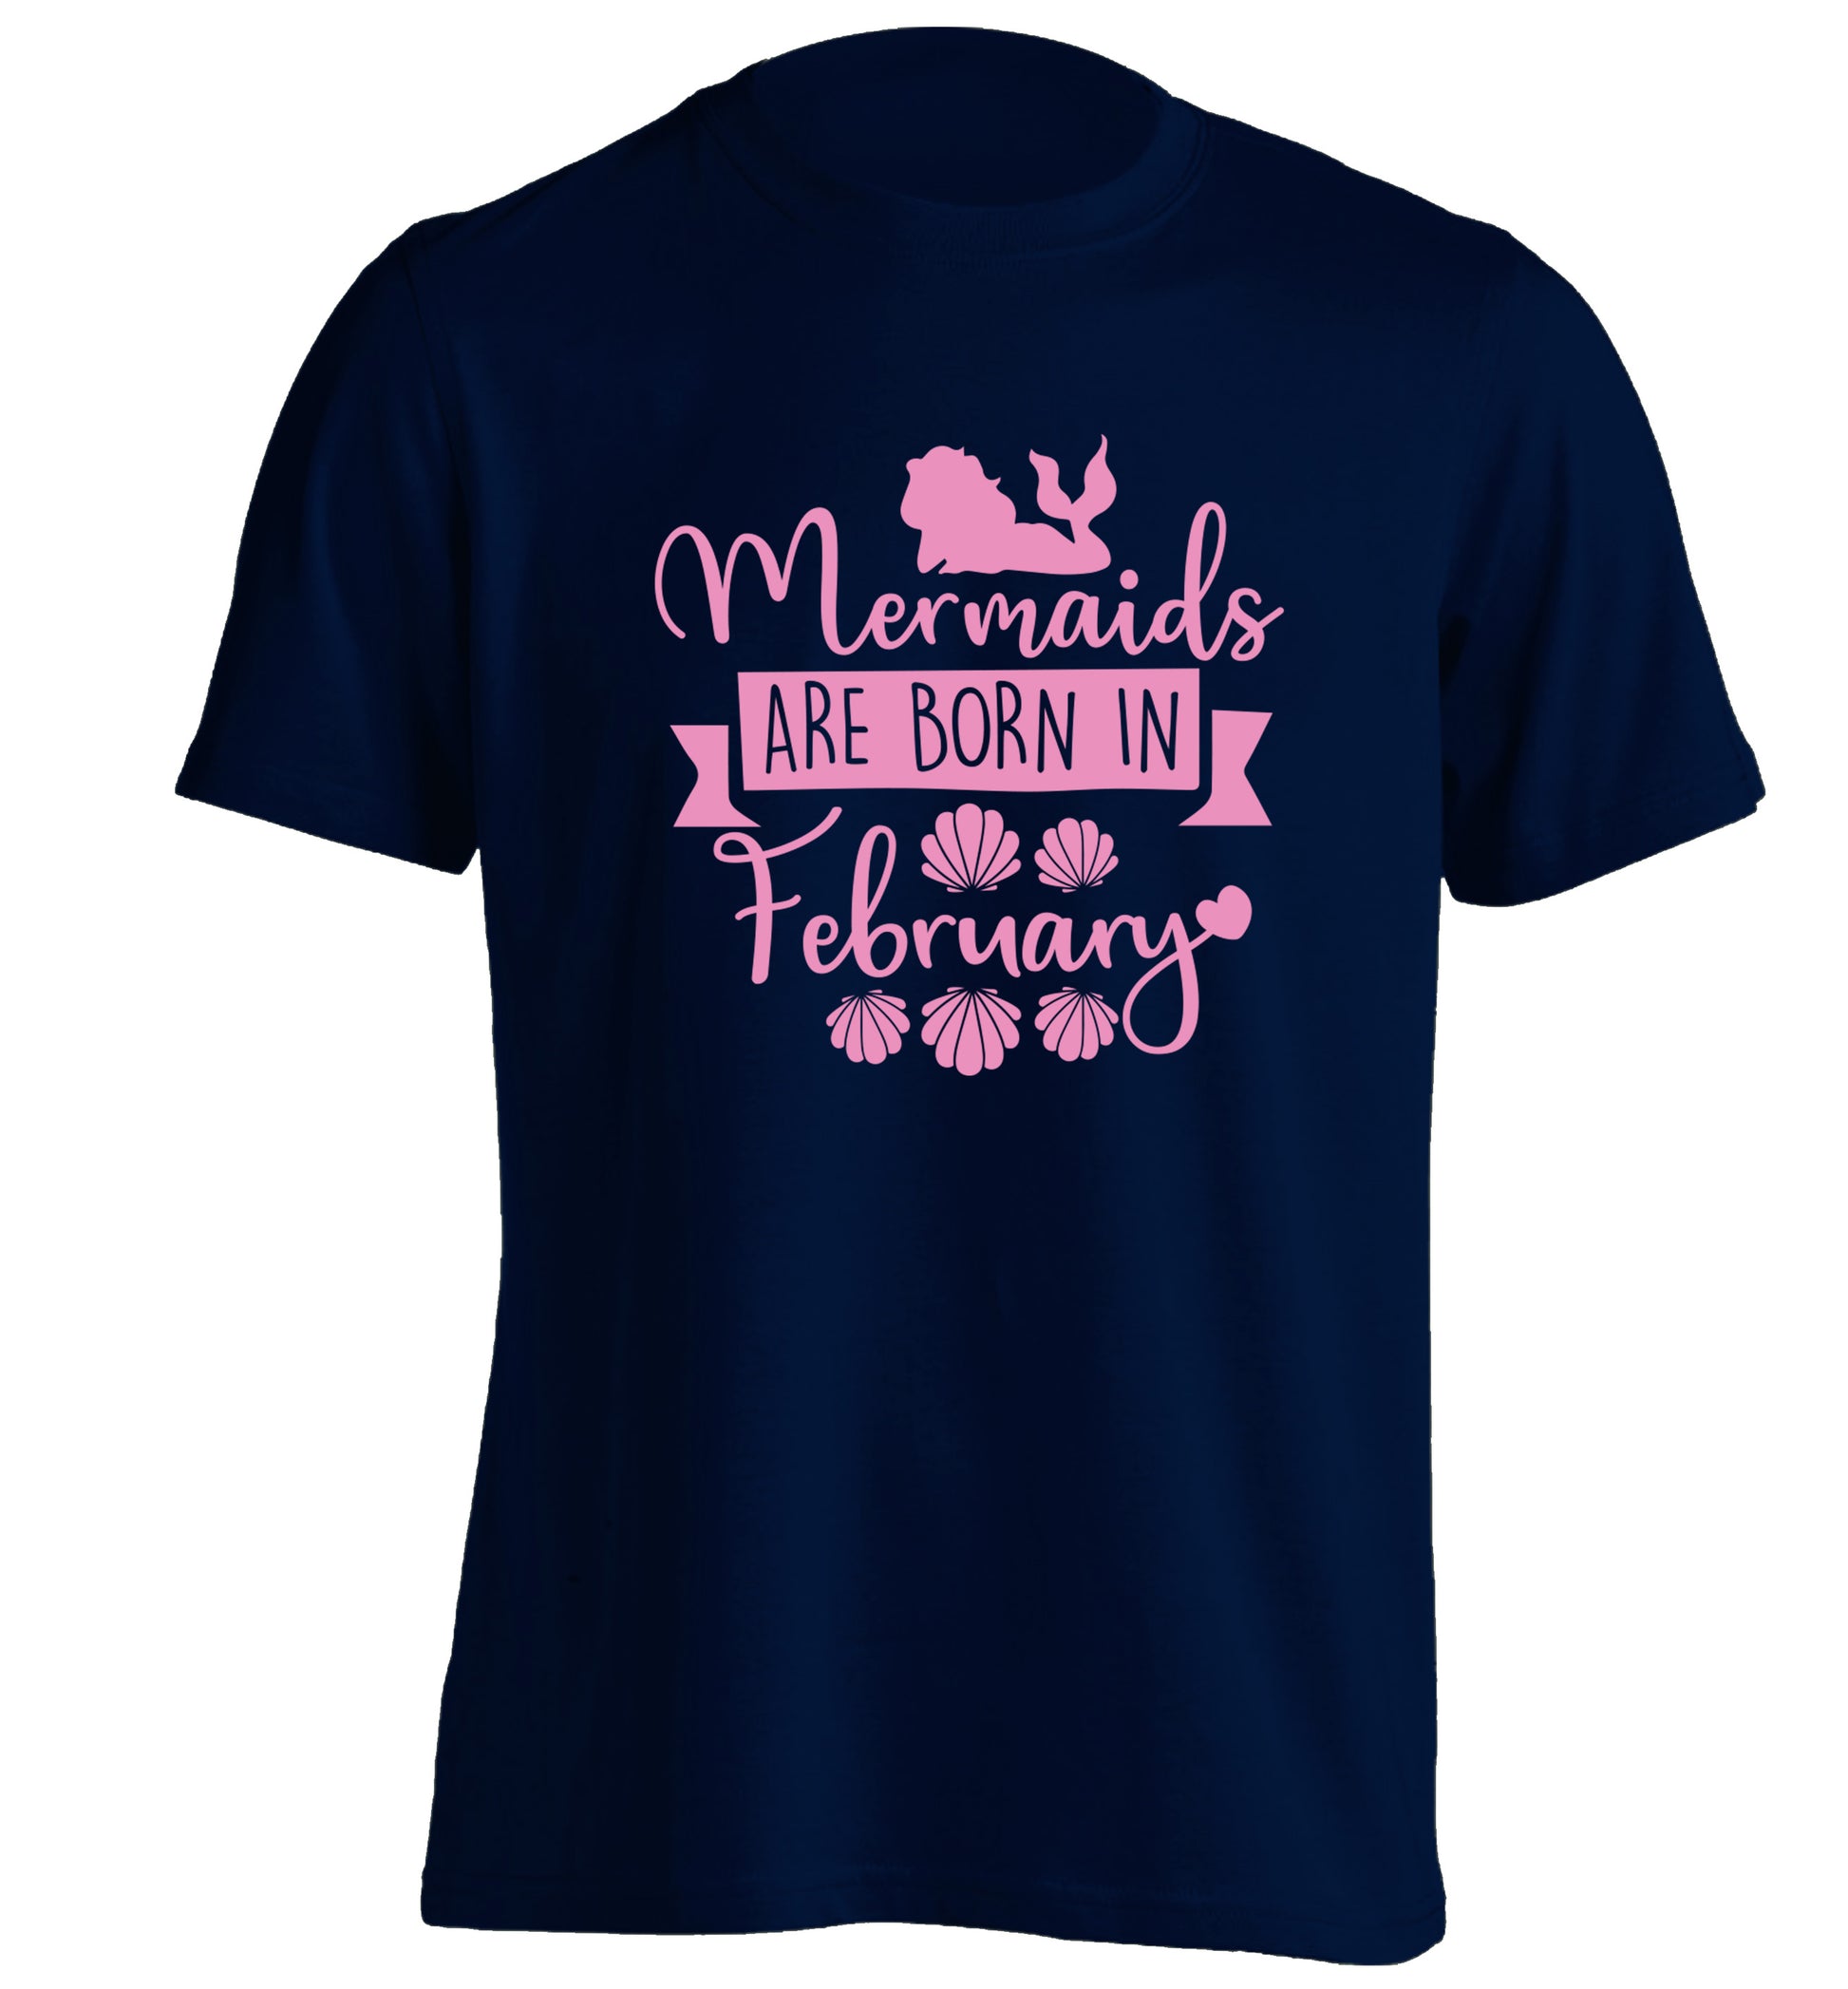 Mermaids are born in February adults unisex navy Tshirt 2XL